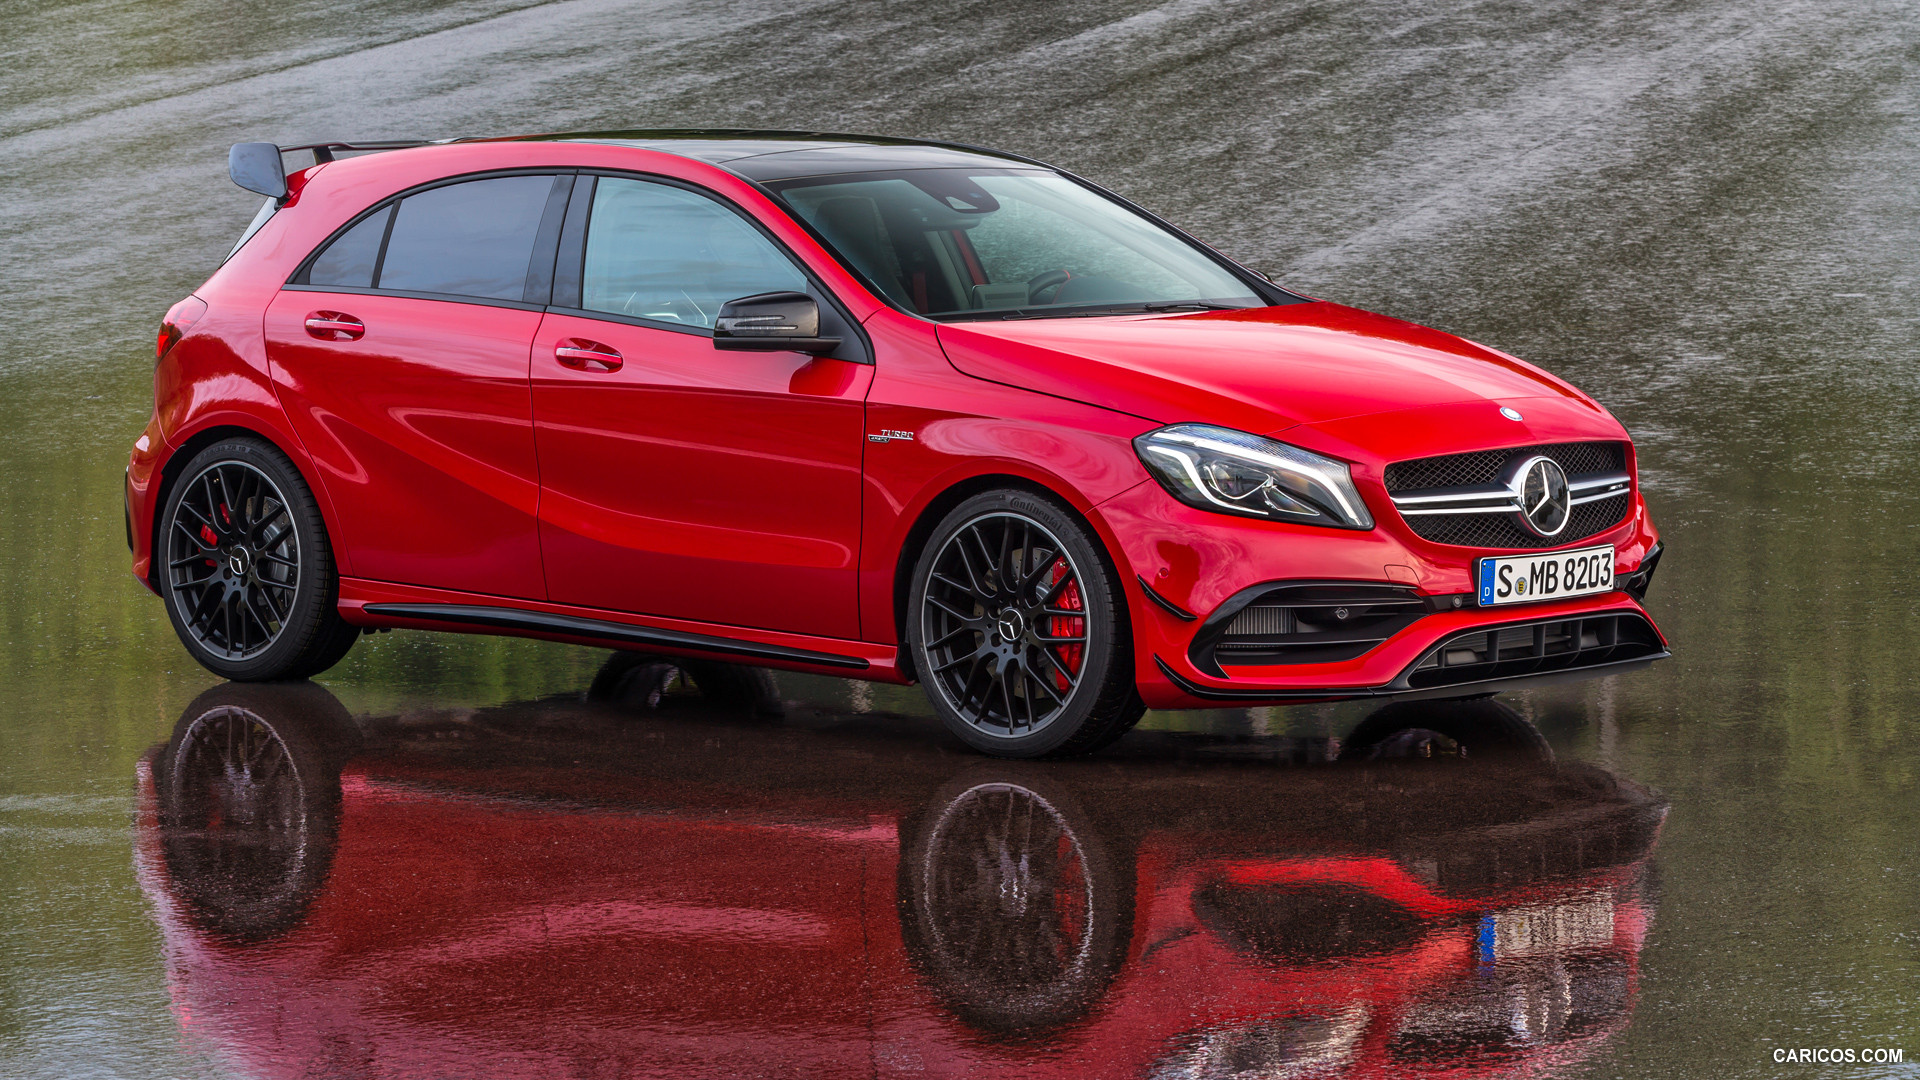 2016 Mercedes-AMG A45 AMG Exclusive (Jupiter Red) - Front, #3 of 15